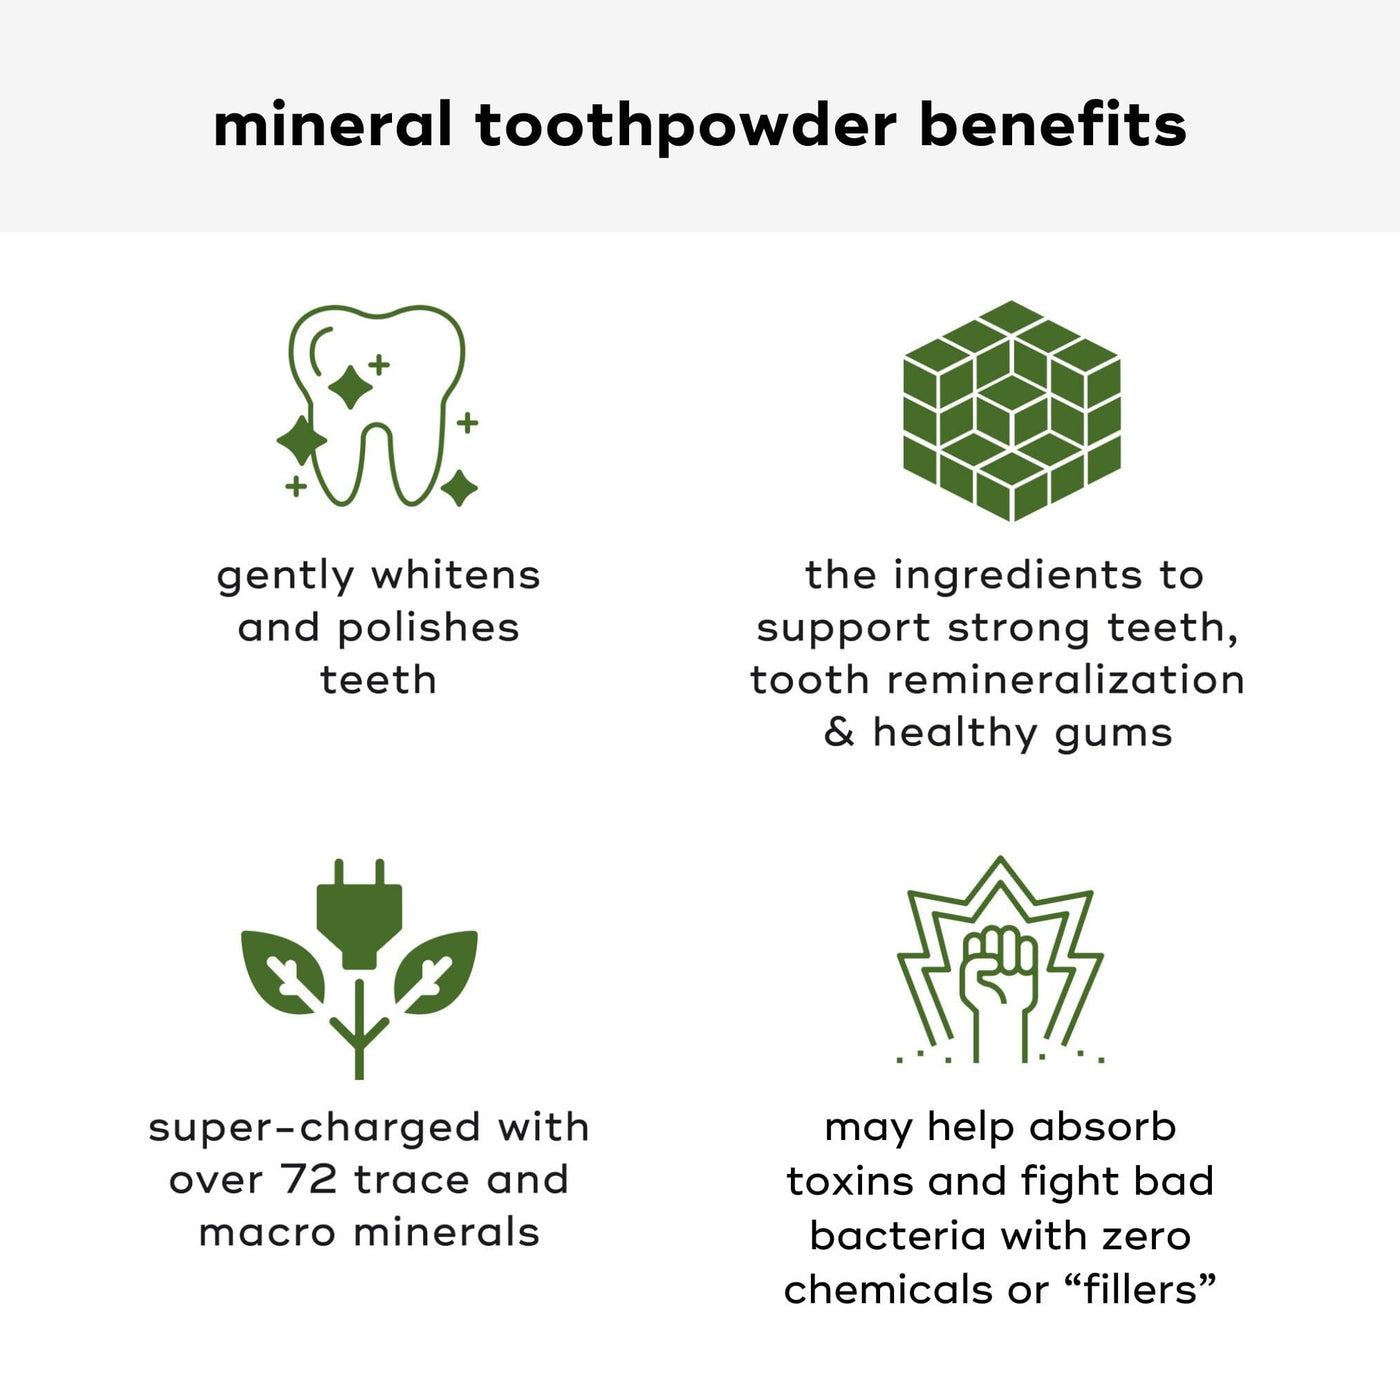 Mineral Toothpowder Benefits : Gently whitens, ingredients to support tooth strength, super-charged with 72 trace minerals, may help absorb toxins.